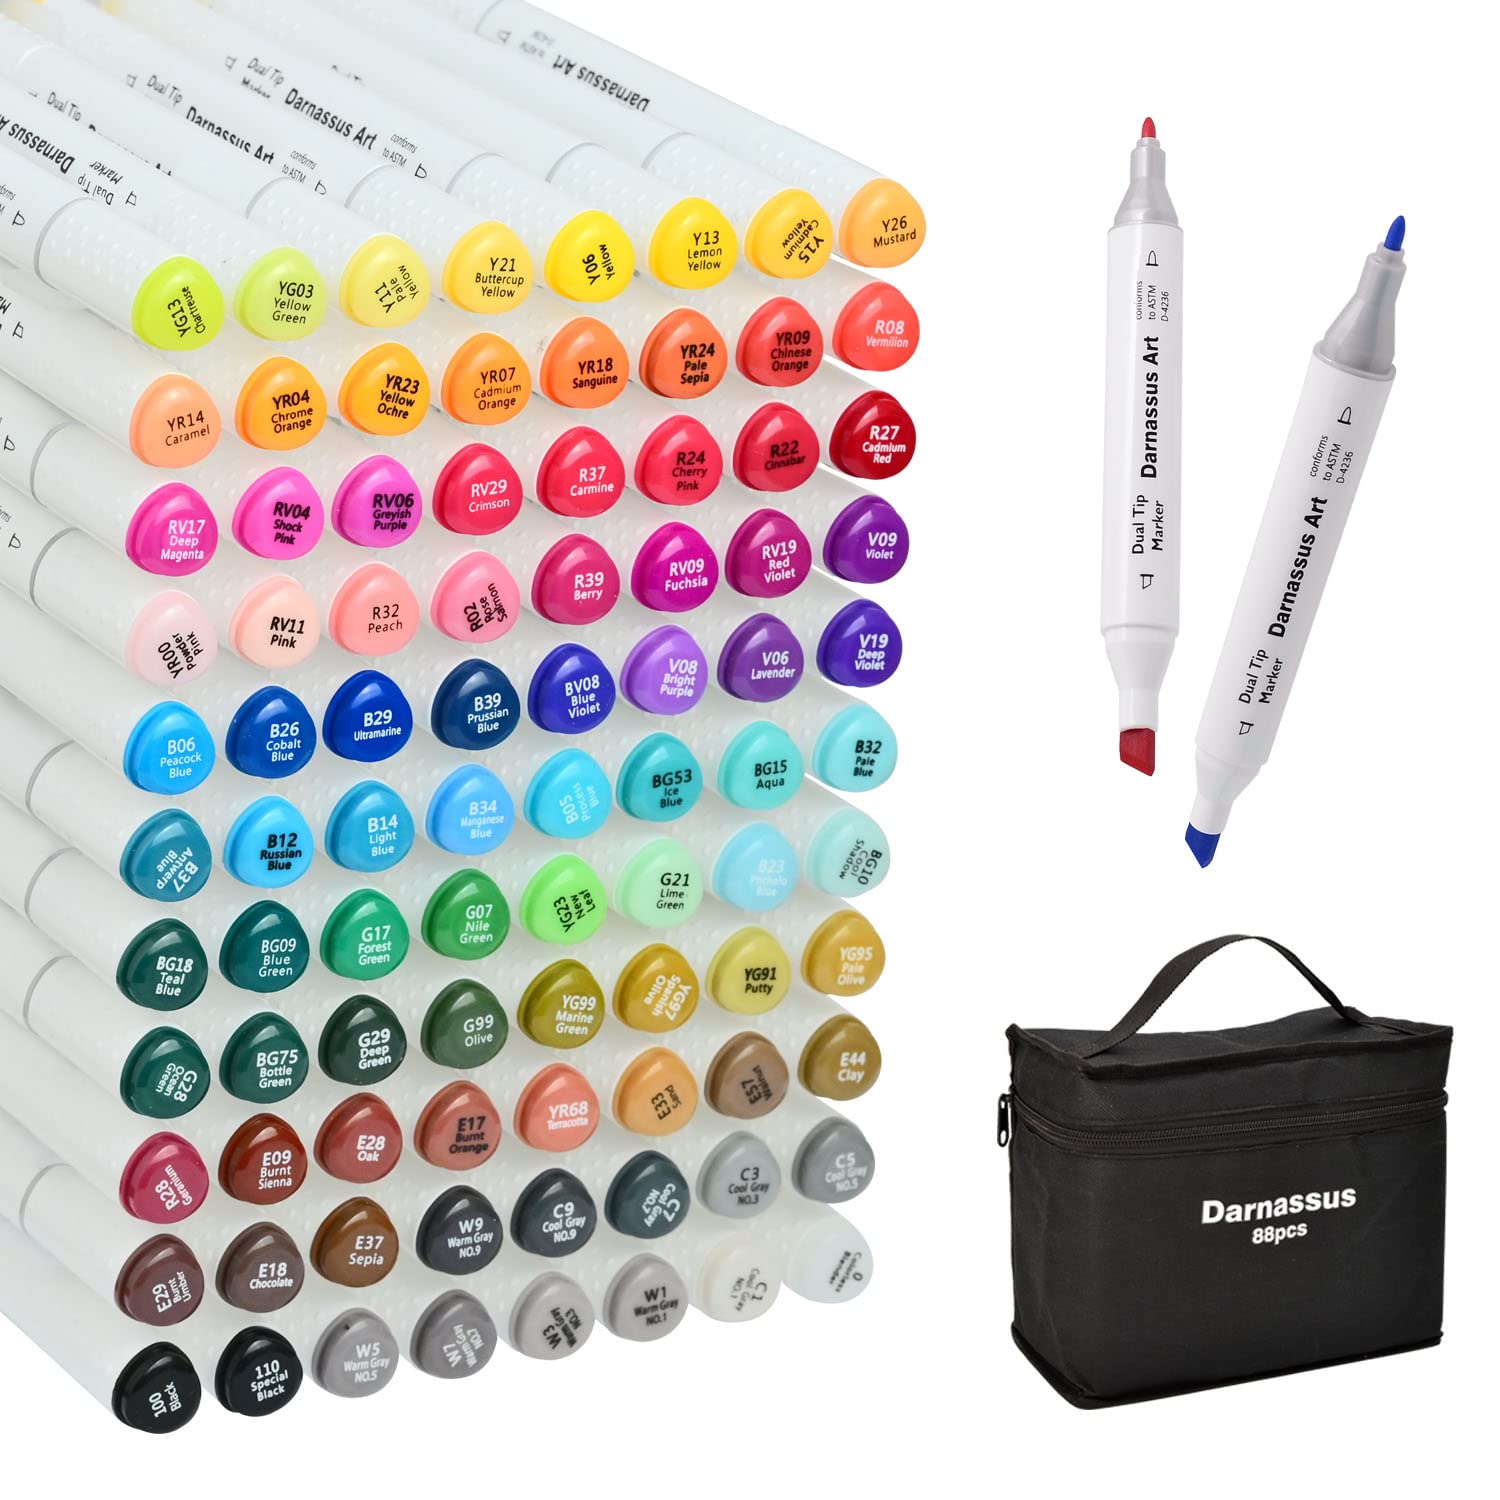 60 Dual Tip Art Markers Set For Coloring – Double Sided Artist